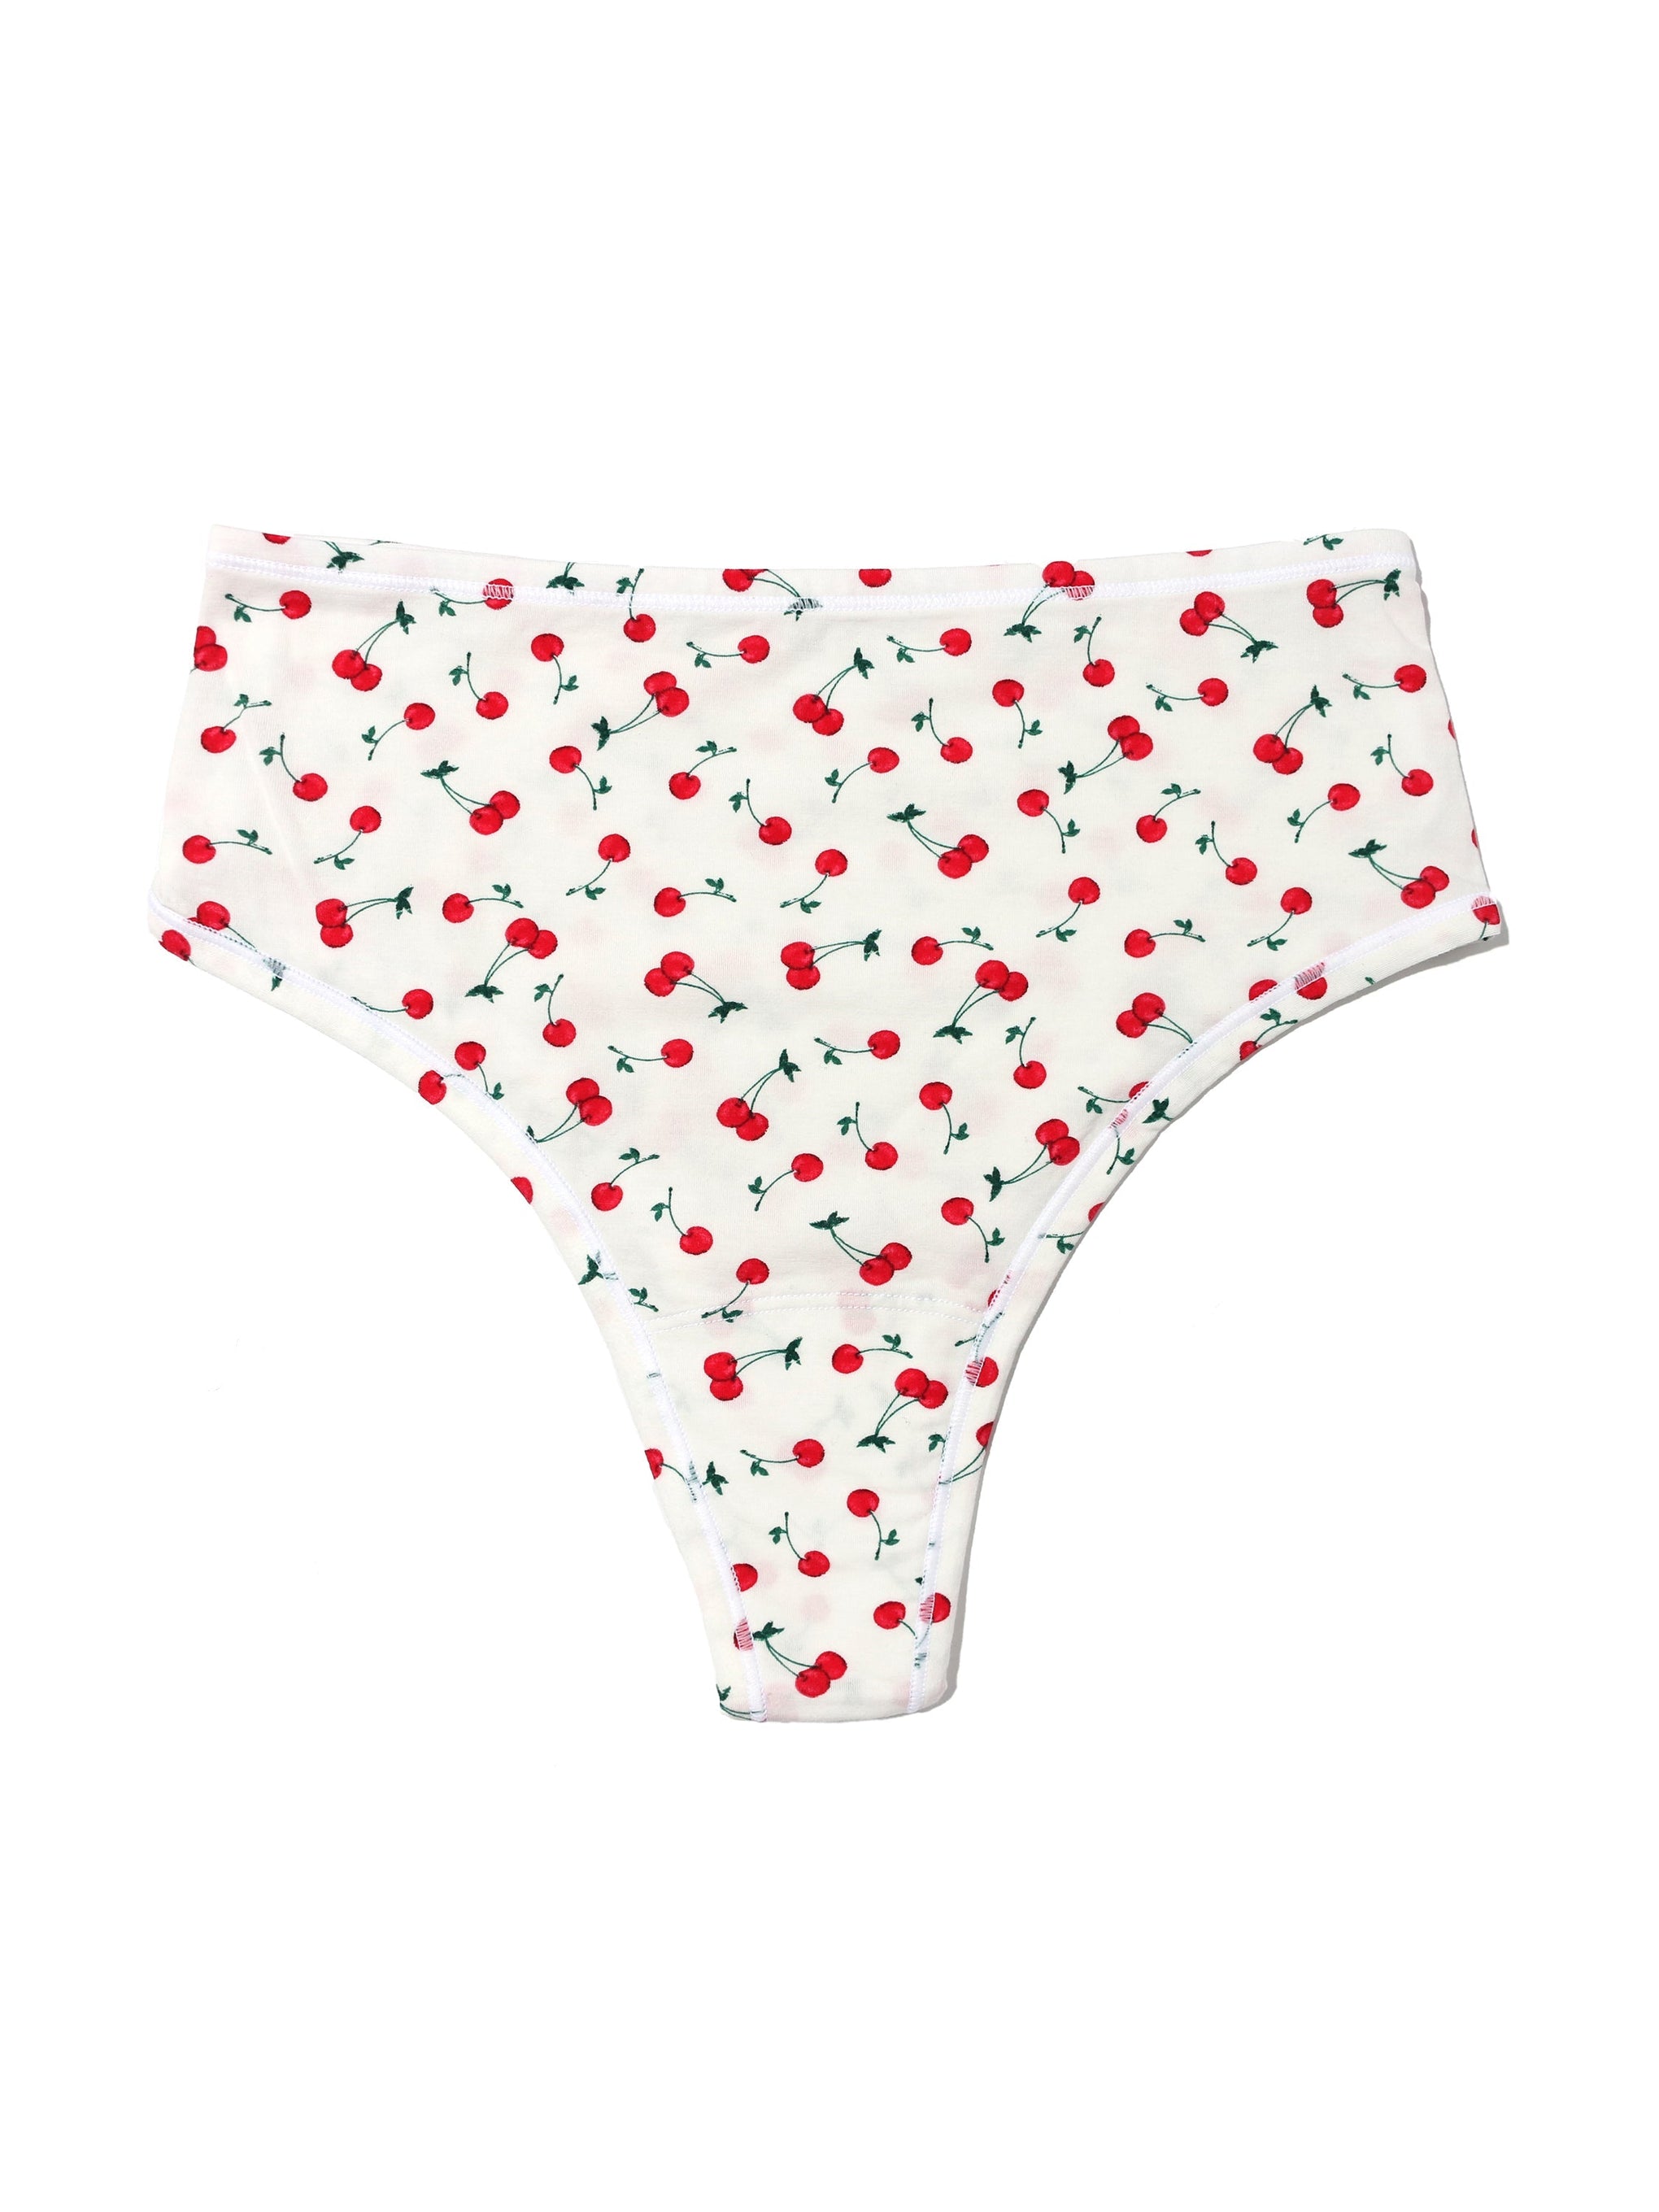 Red Panties With White Dots. High Waist. Underwear for Women